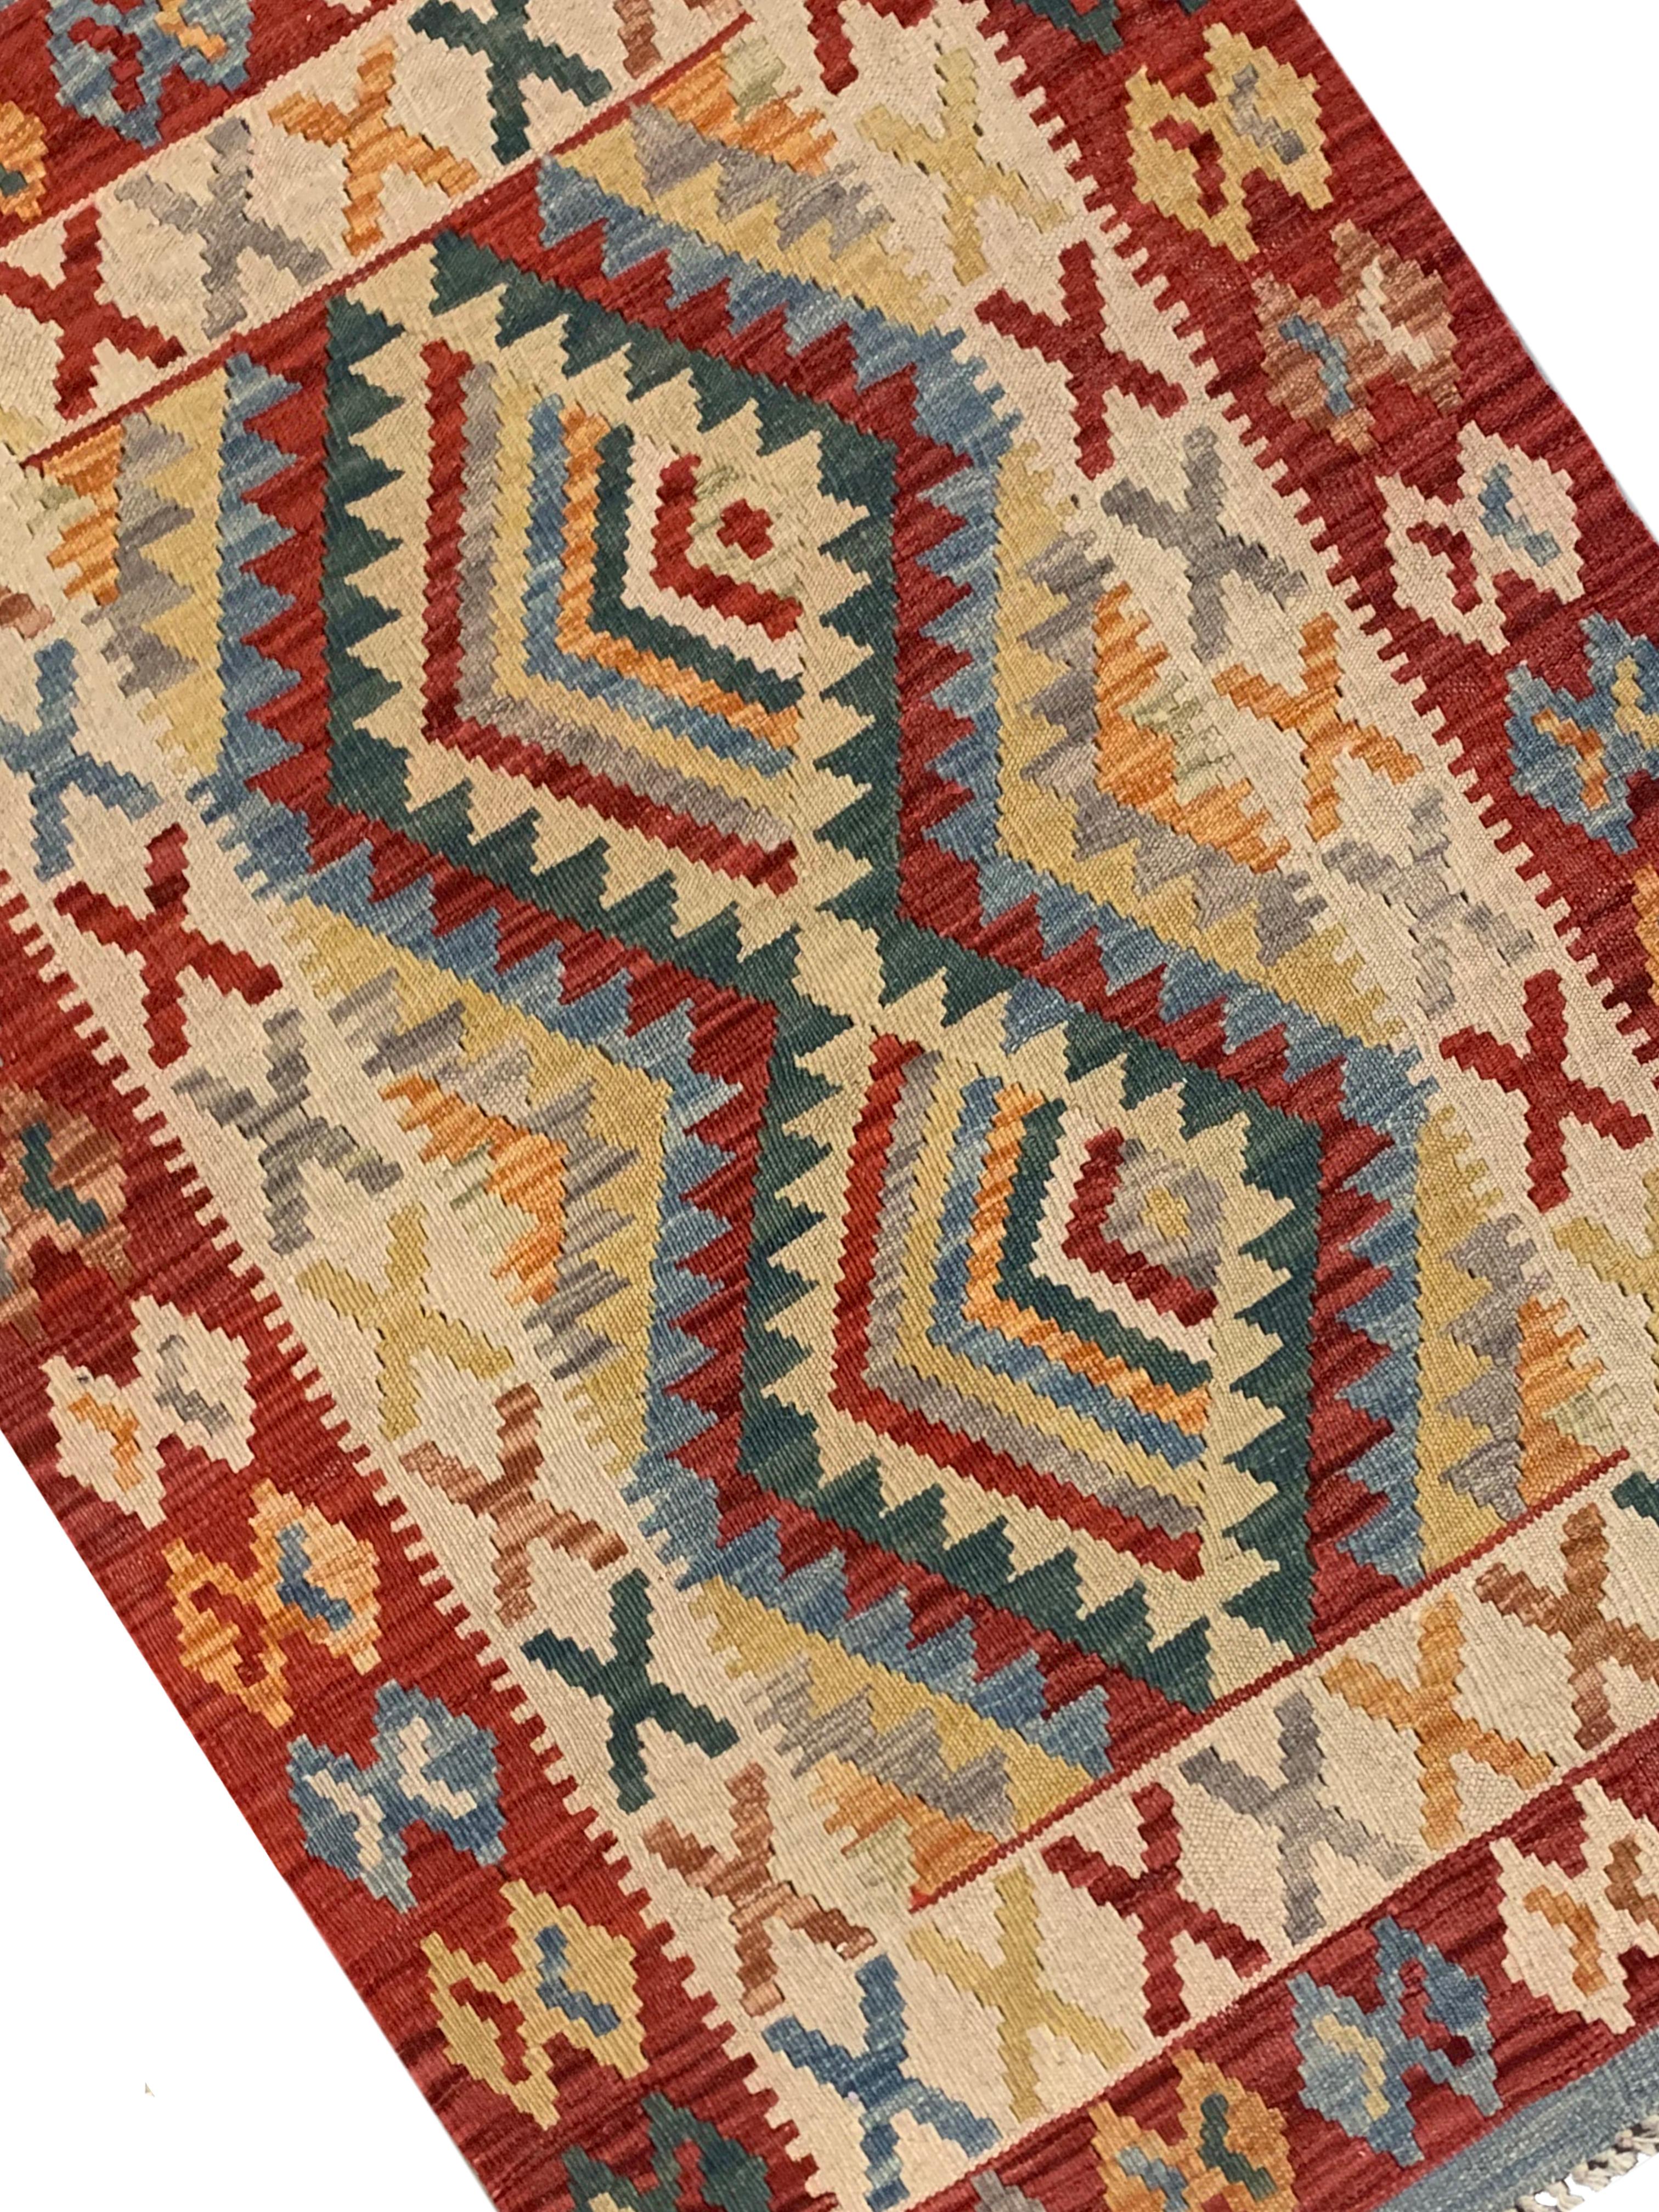 This fine wool area rug was woven by hand in the early 2000s. The central design features a bold geometric pattern with two large medallions that have been woven with a decorative surrounding design and border. Woven in green, beige, red and blue